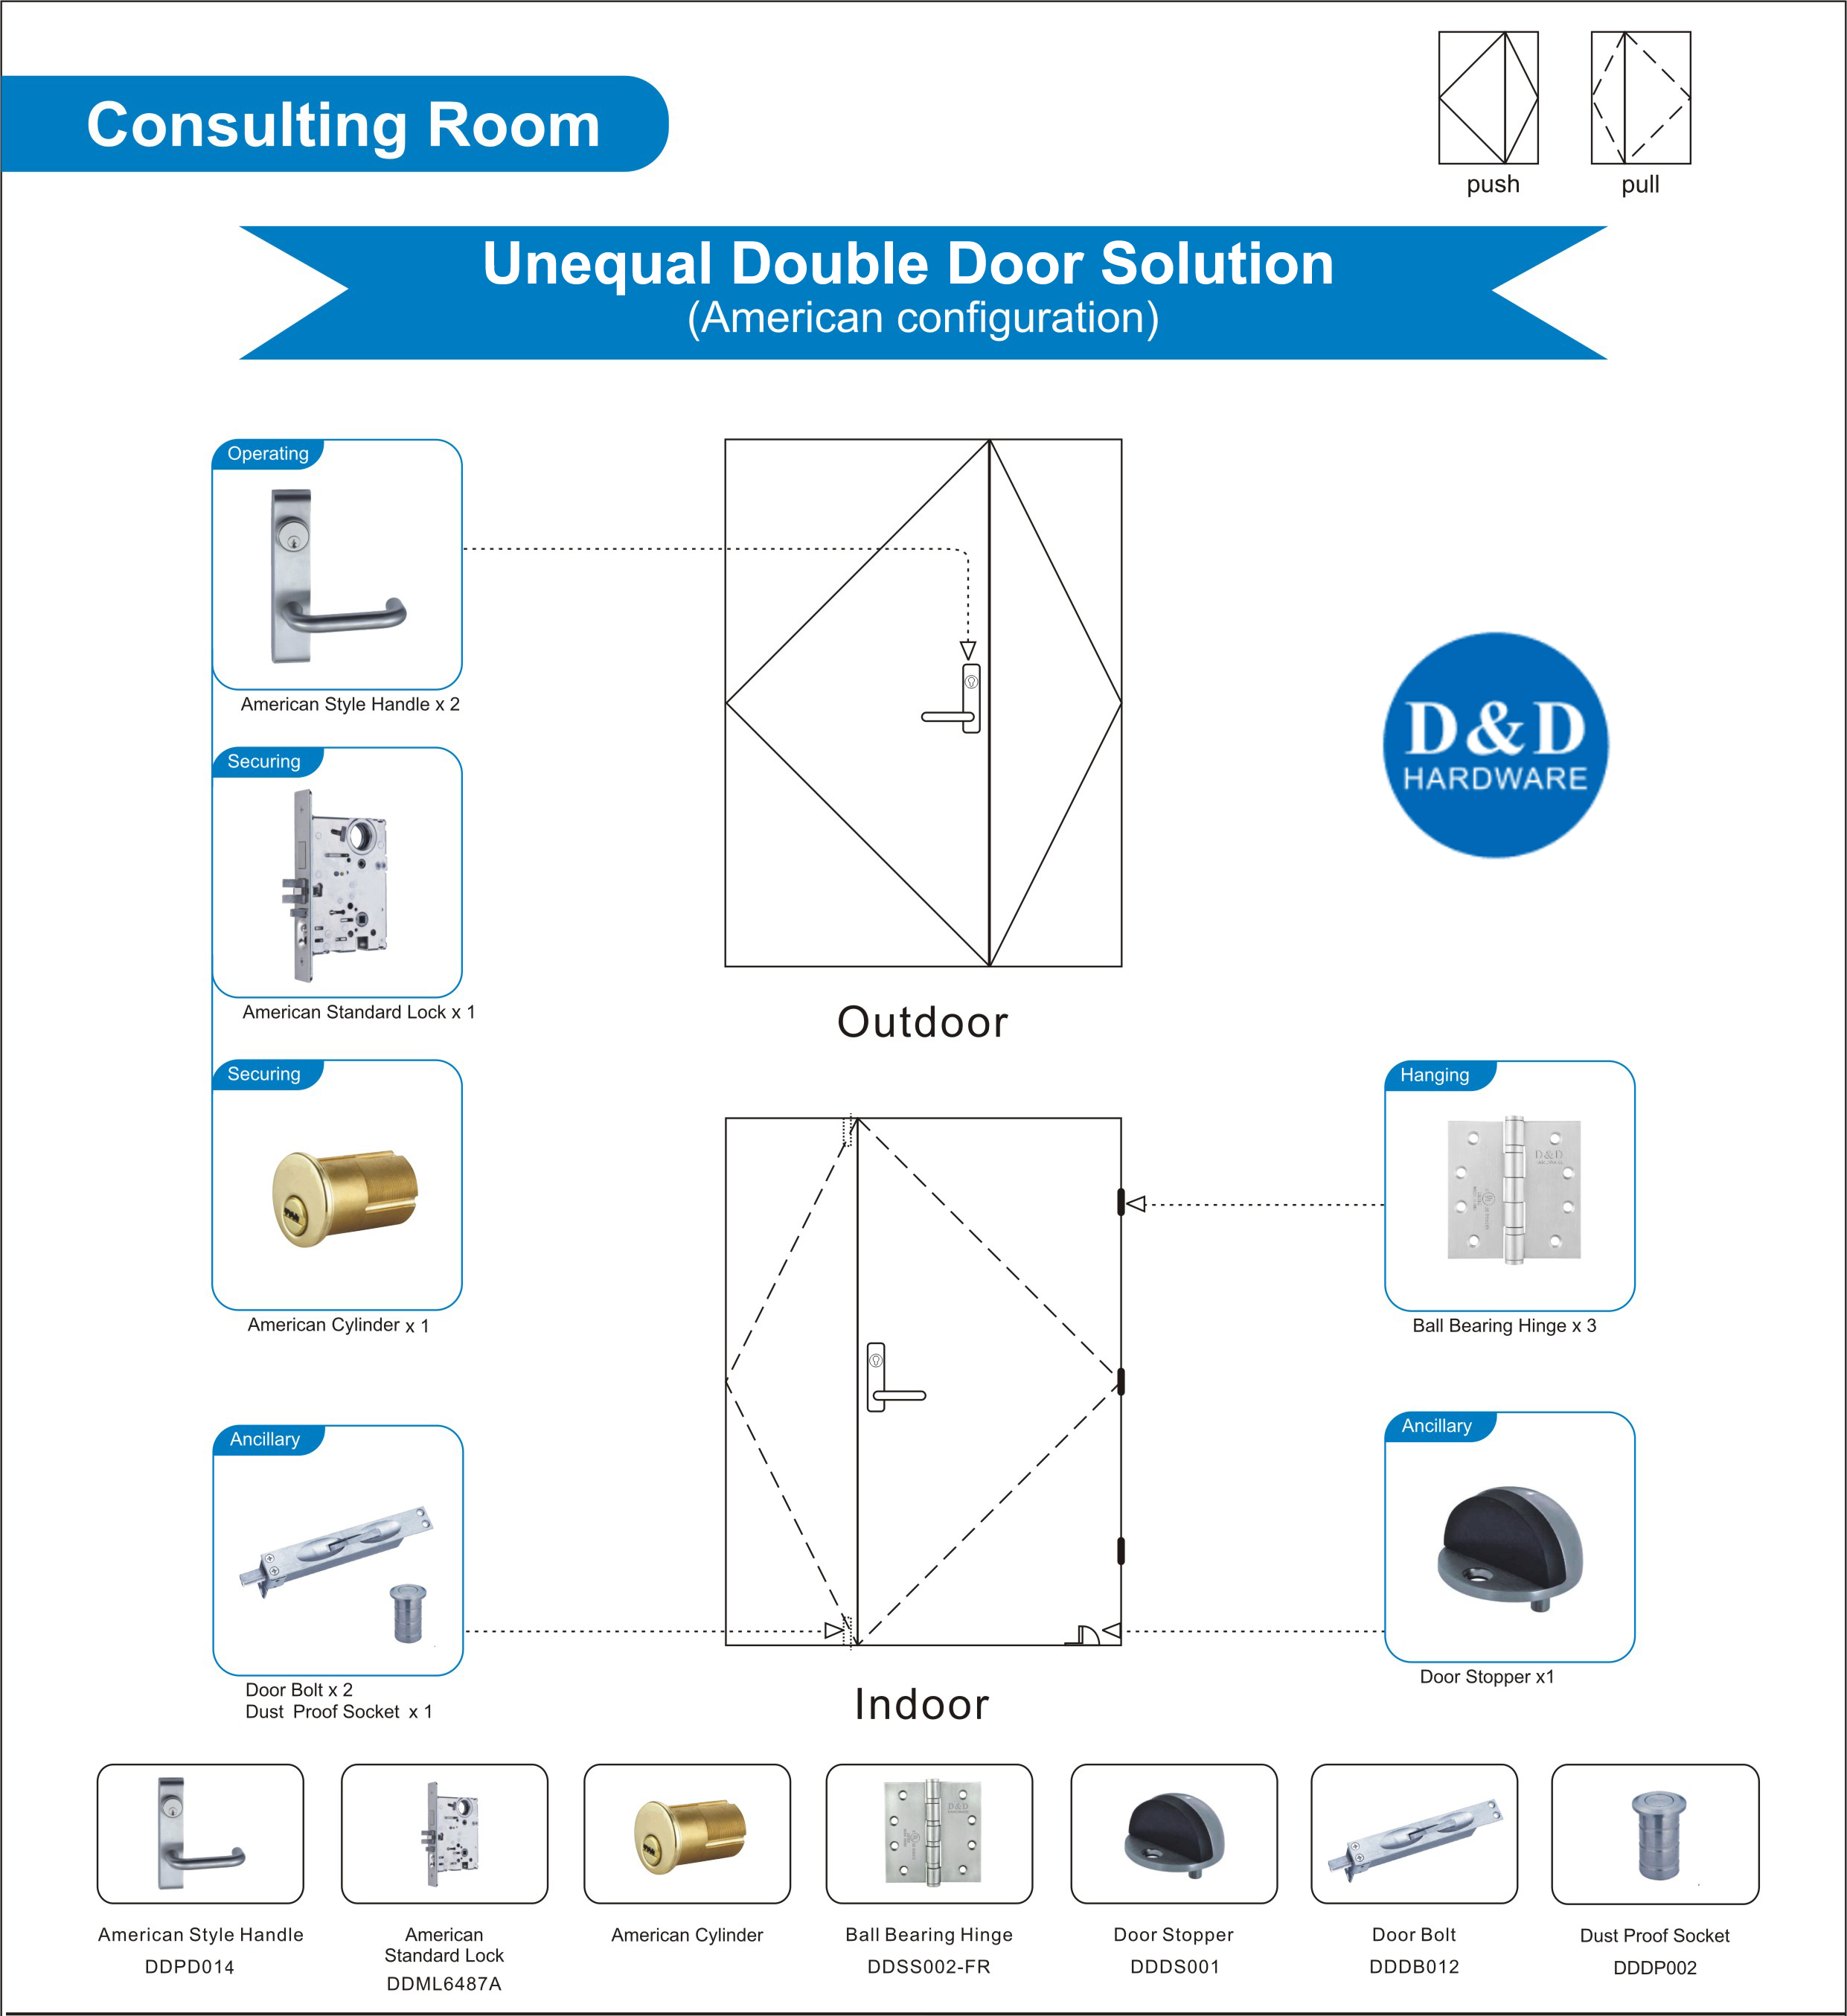 Building Hardware Solution for Consulting Room Unequal Double Door